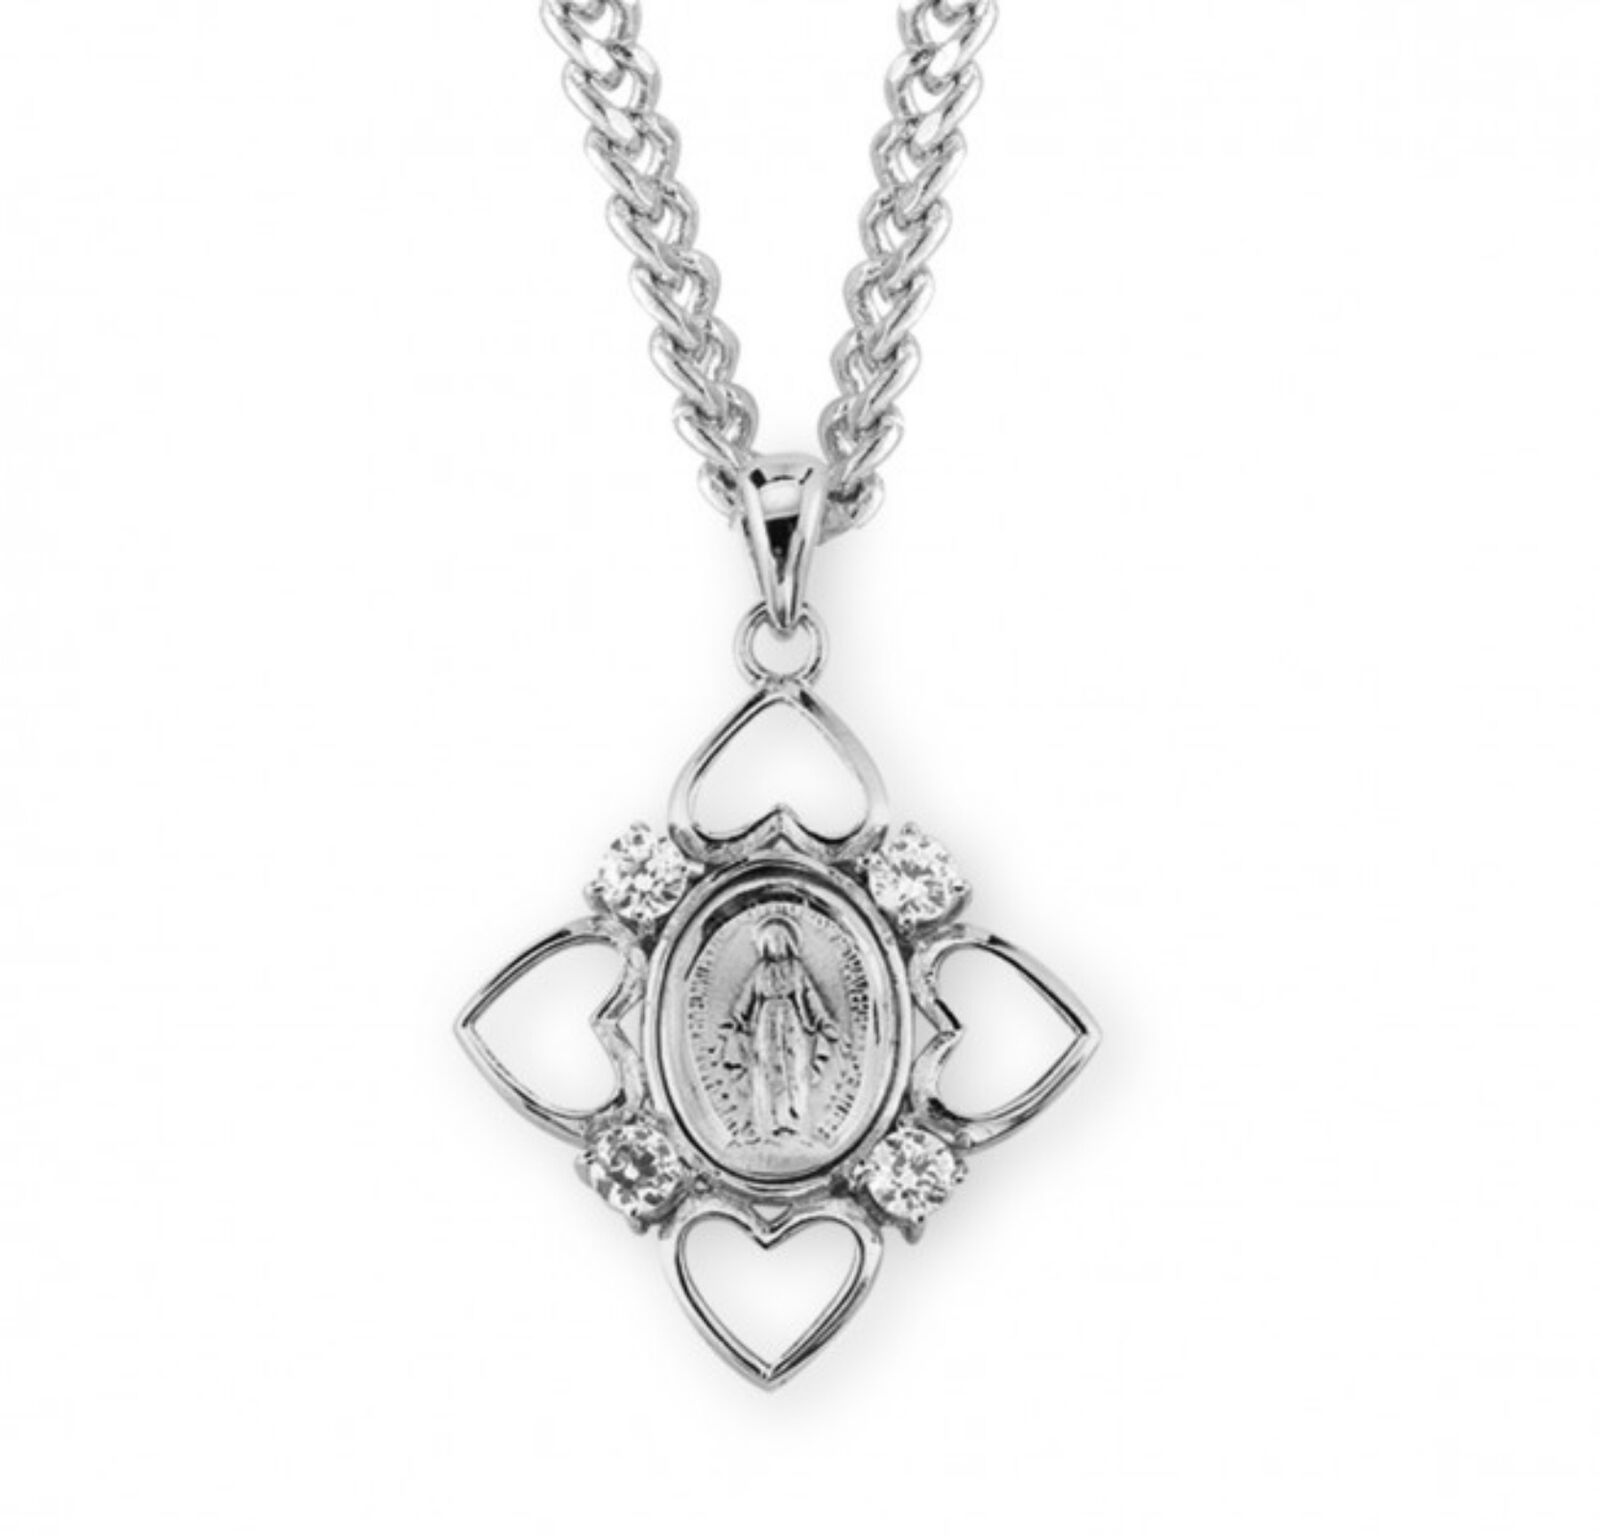 N.G. Sterling Silver Crystal Cubic Zirconia Miraculous Medal Pendant Necklace